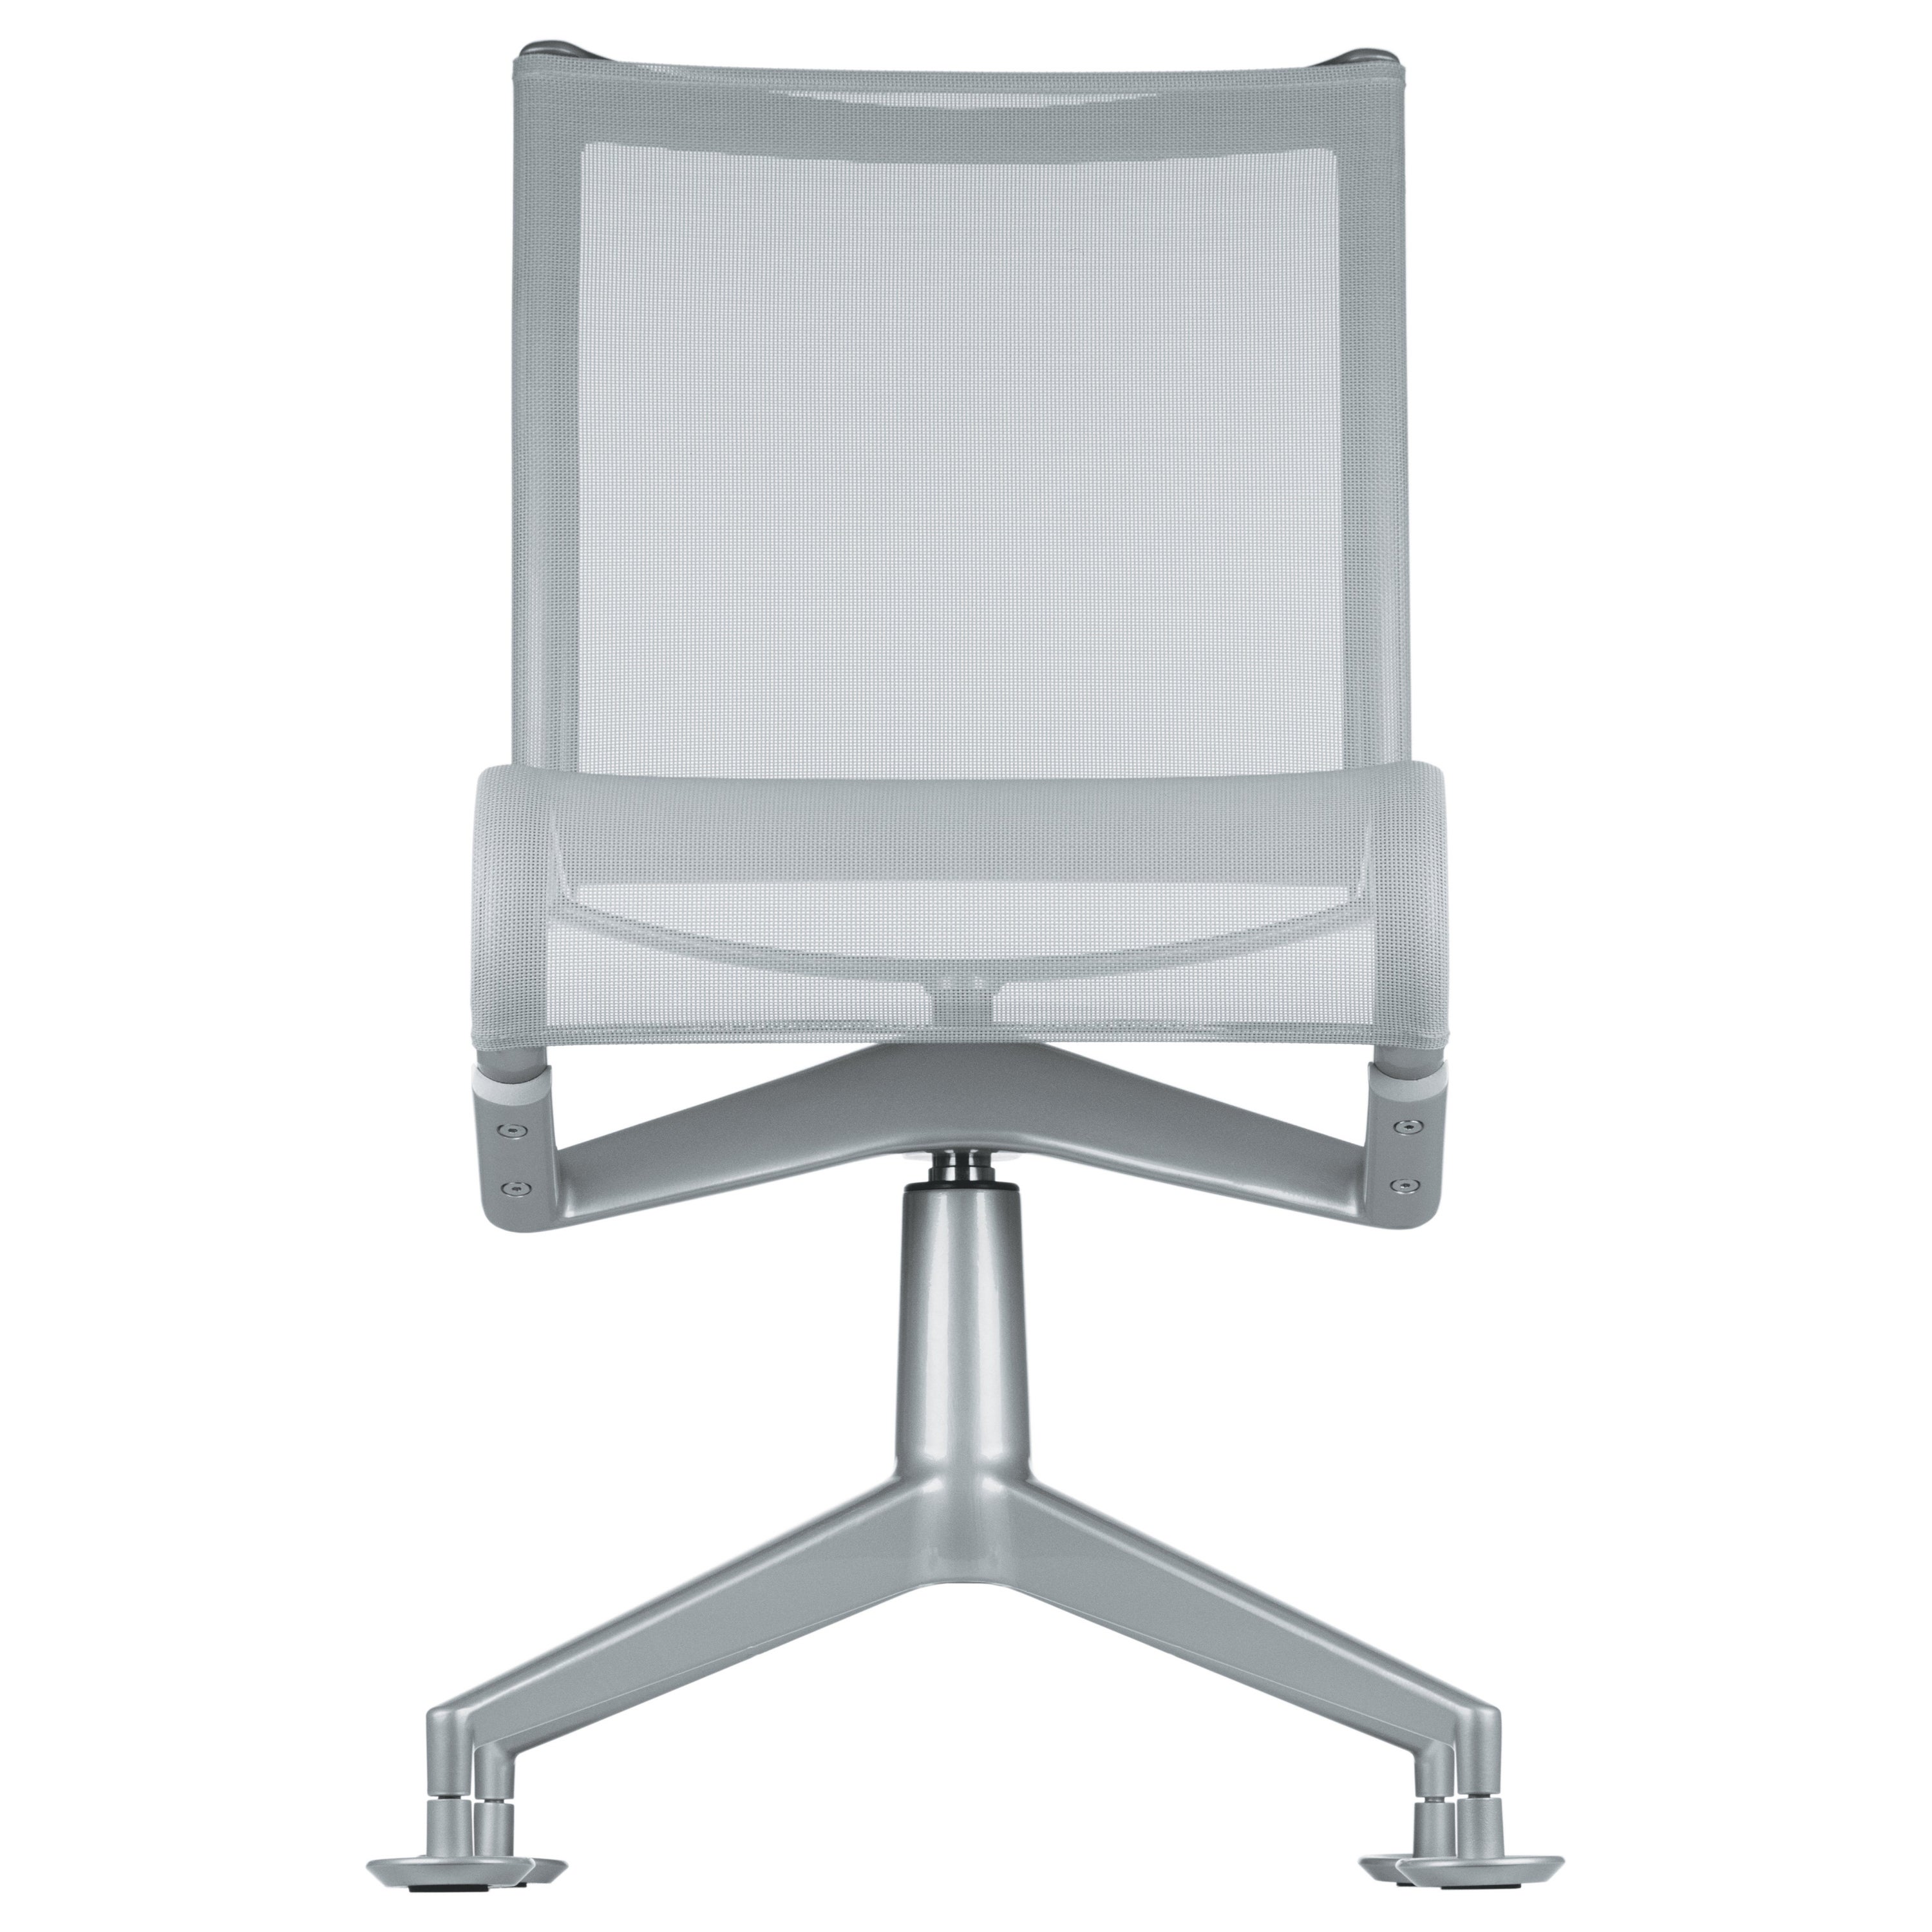 Alias 436 Meetingframe 44 Chair in Light Grey Mesh with Lacquered Aluminum Frame For Sale